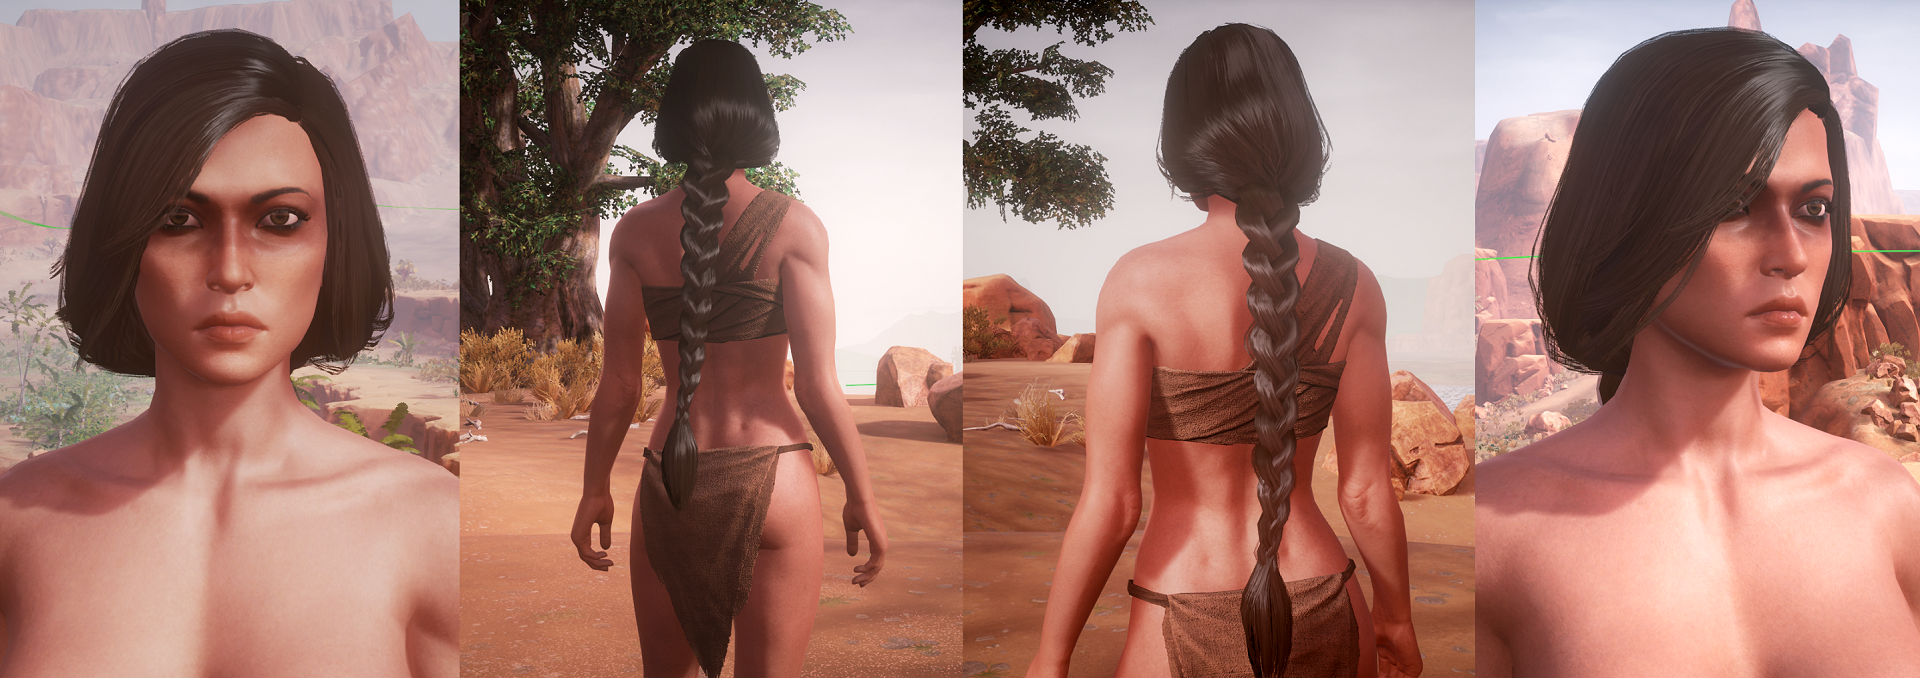 Conan Exiles - Conan Exiles character model: The Twisted Path - Новости Ste...